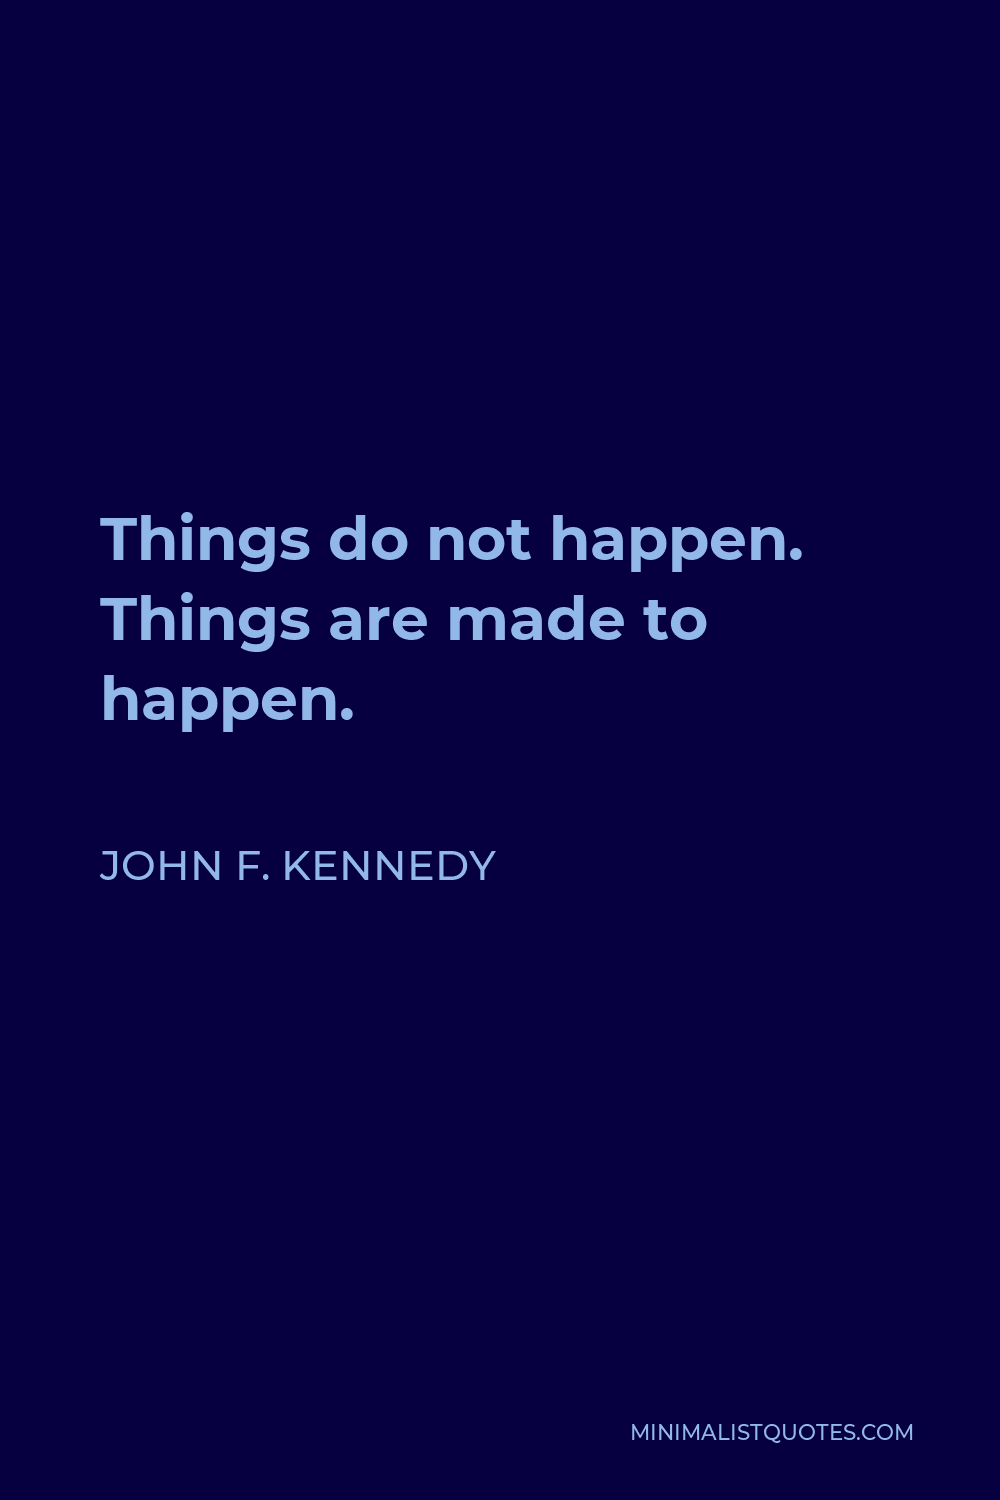 John F Kennedy Quote Things Do Not Happen Things Are Made To Happen